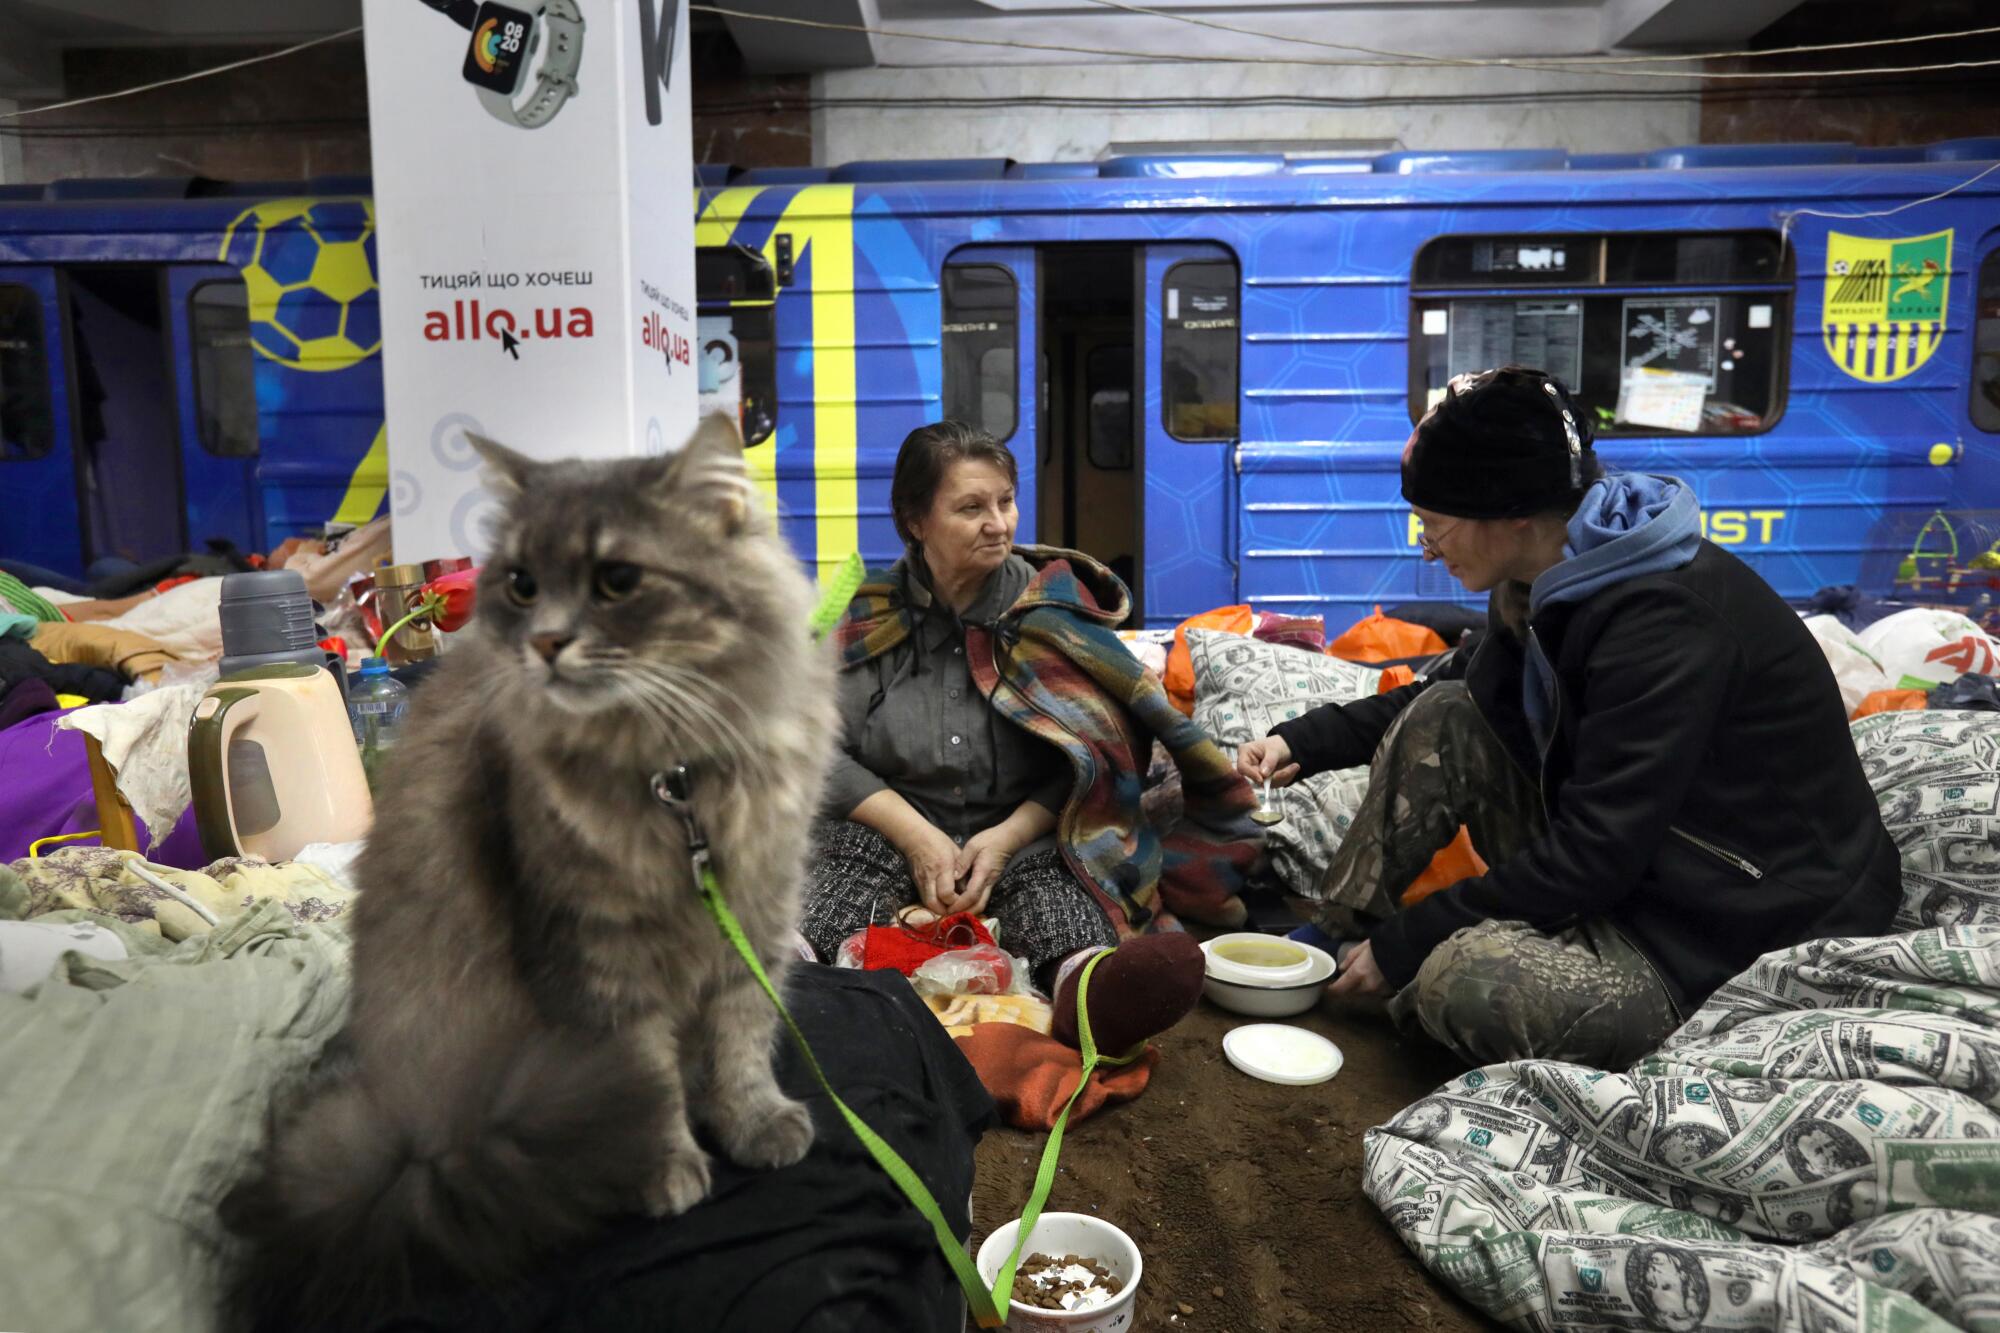 People living in the subway in Kharkiv